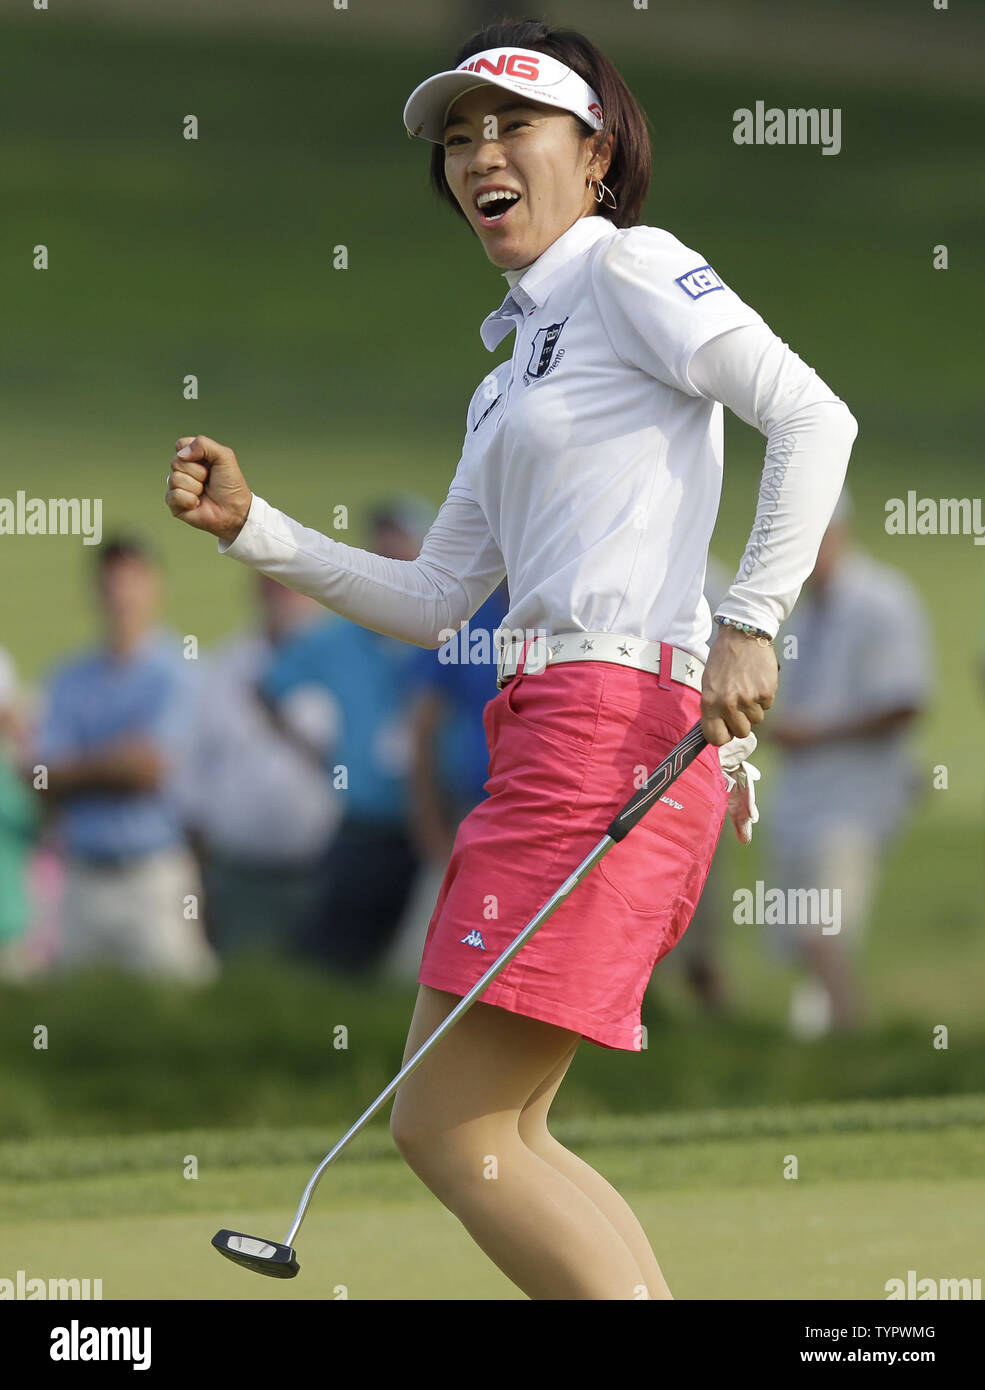 Shiho Oyama of Japan celebrates after making a putt for birdie on the 16th hole in the final round of the LPGA U.S. Women's Open Championship at Lancaster Country Club in Lancaster, PA on July 12, 2015. In Gee Chun of Korea wins the U.S. Women's Open and her first LPGA major championship with a score of 8 under par.     Photo by John Angelillo/UPI Stock Photo